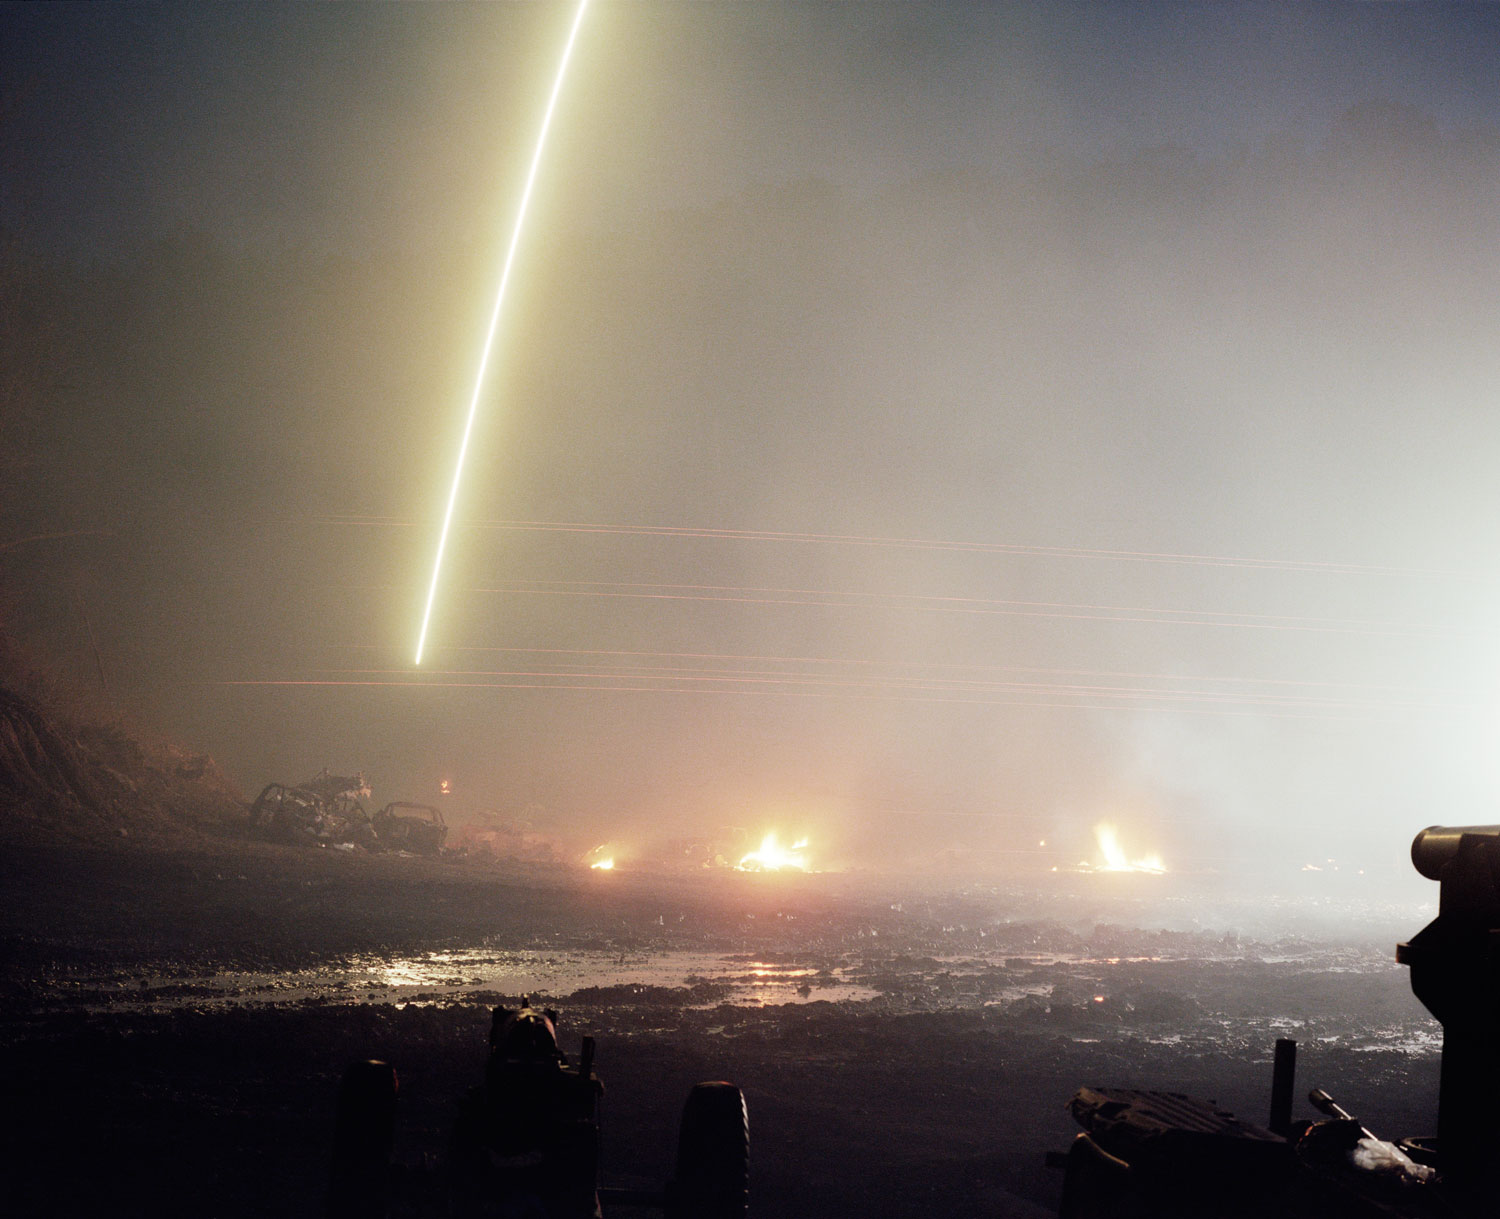 Fires and tracer rounds light up the night.